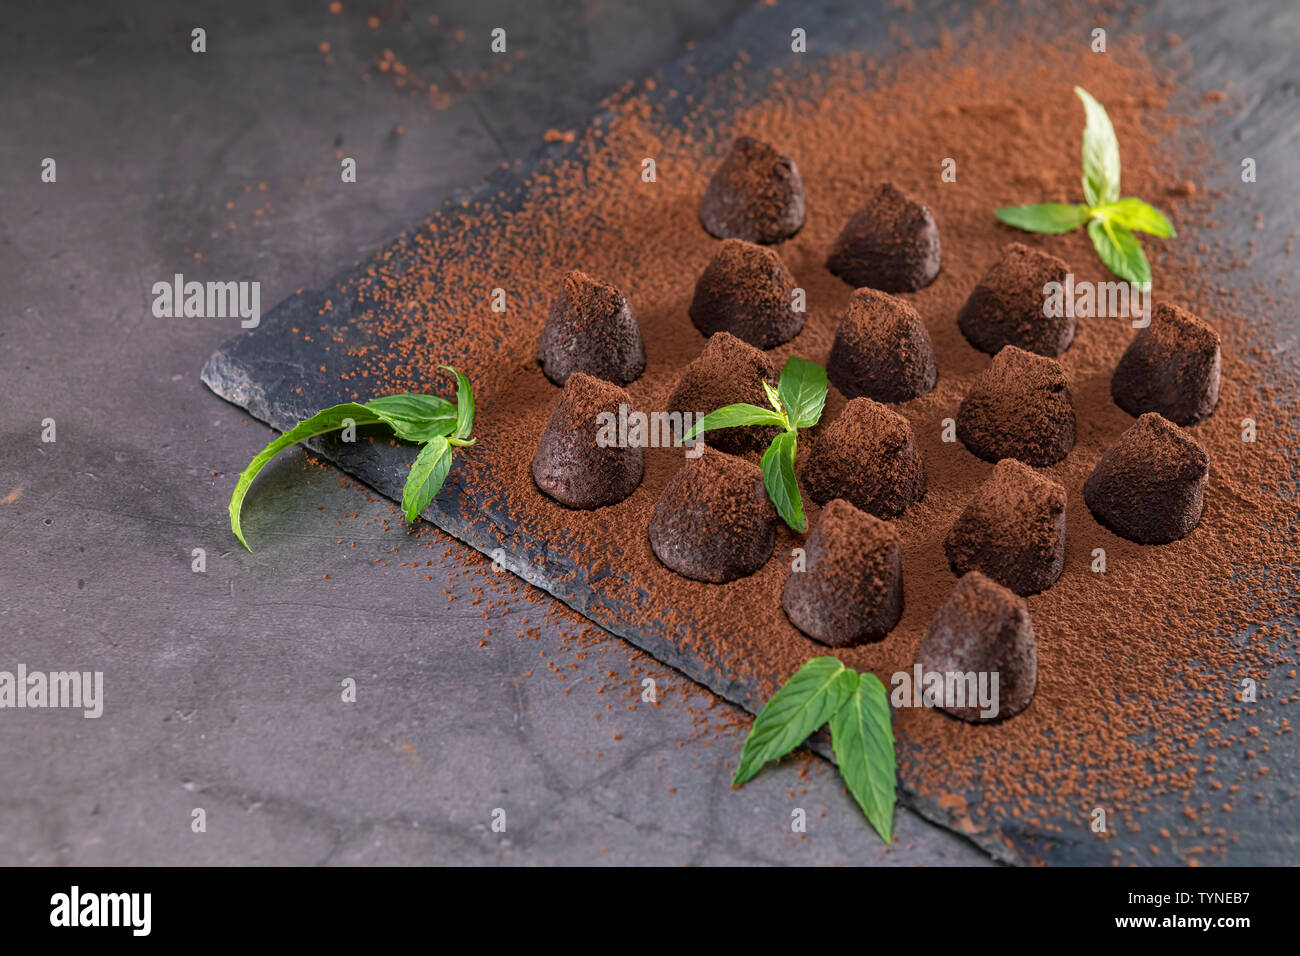 Homemade chocolate truffles with mint sprinkled with cocoa powder on slate. Focus on leaf. Stock Photo